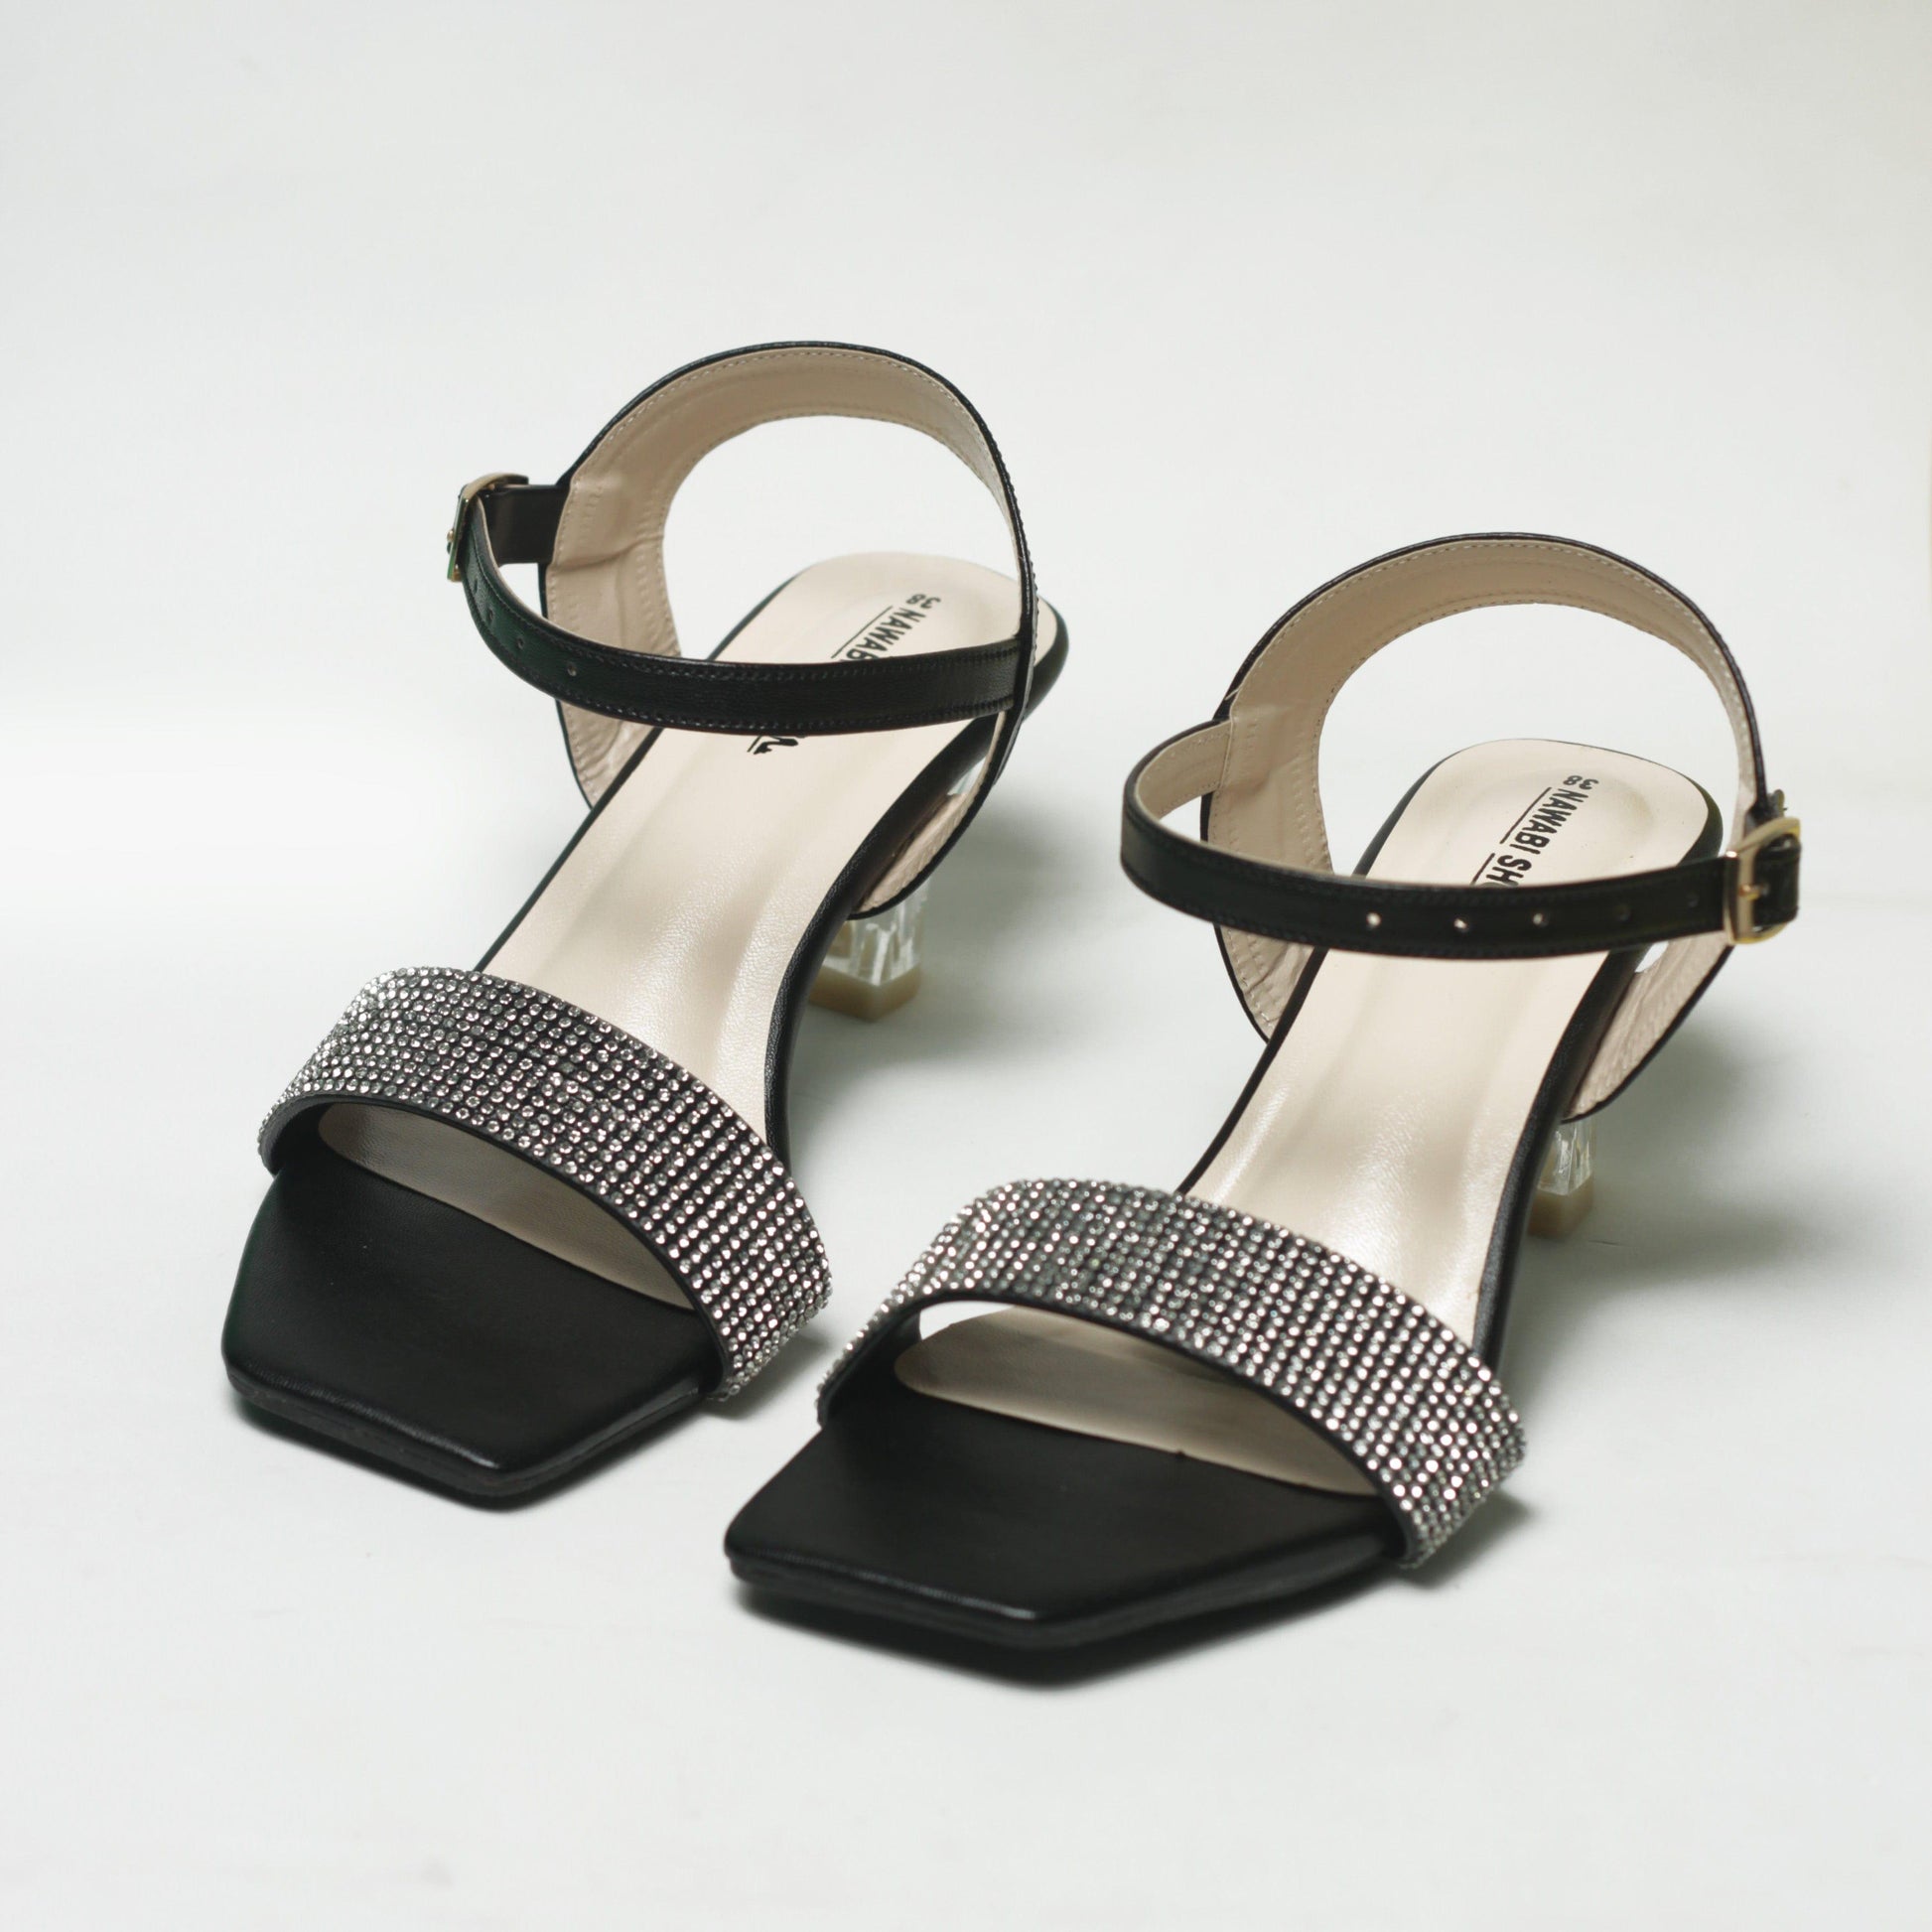 Nawabi Shoes BD Shoes 35 / black Shop Our Collection of Fashion-Forward Clear Heel Shoes